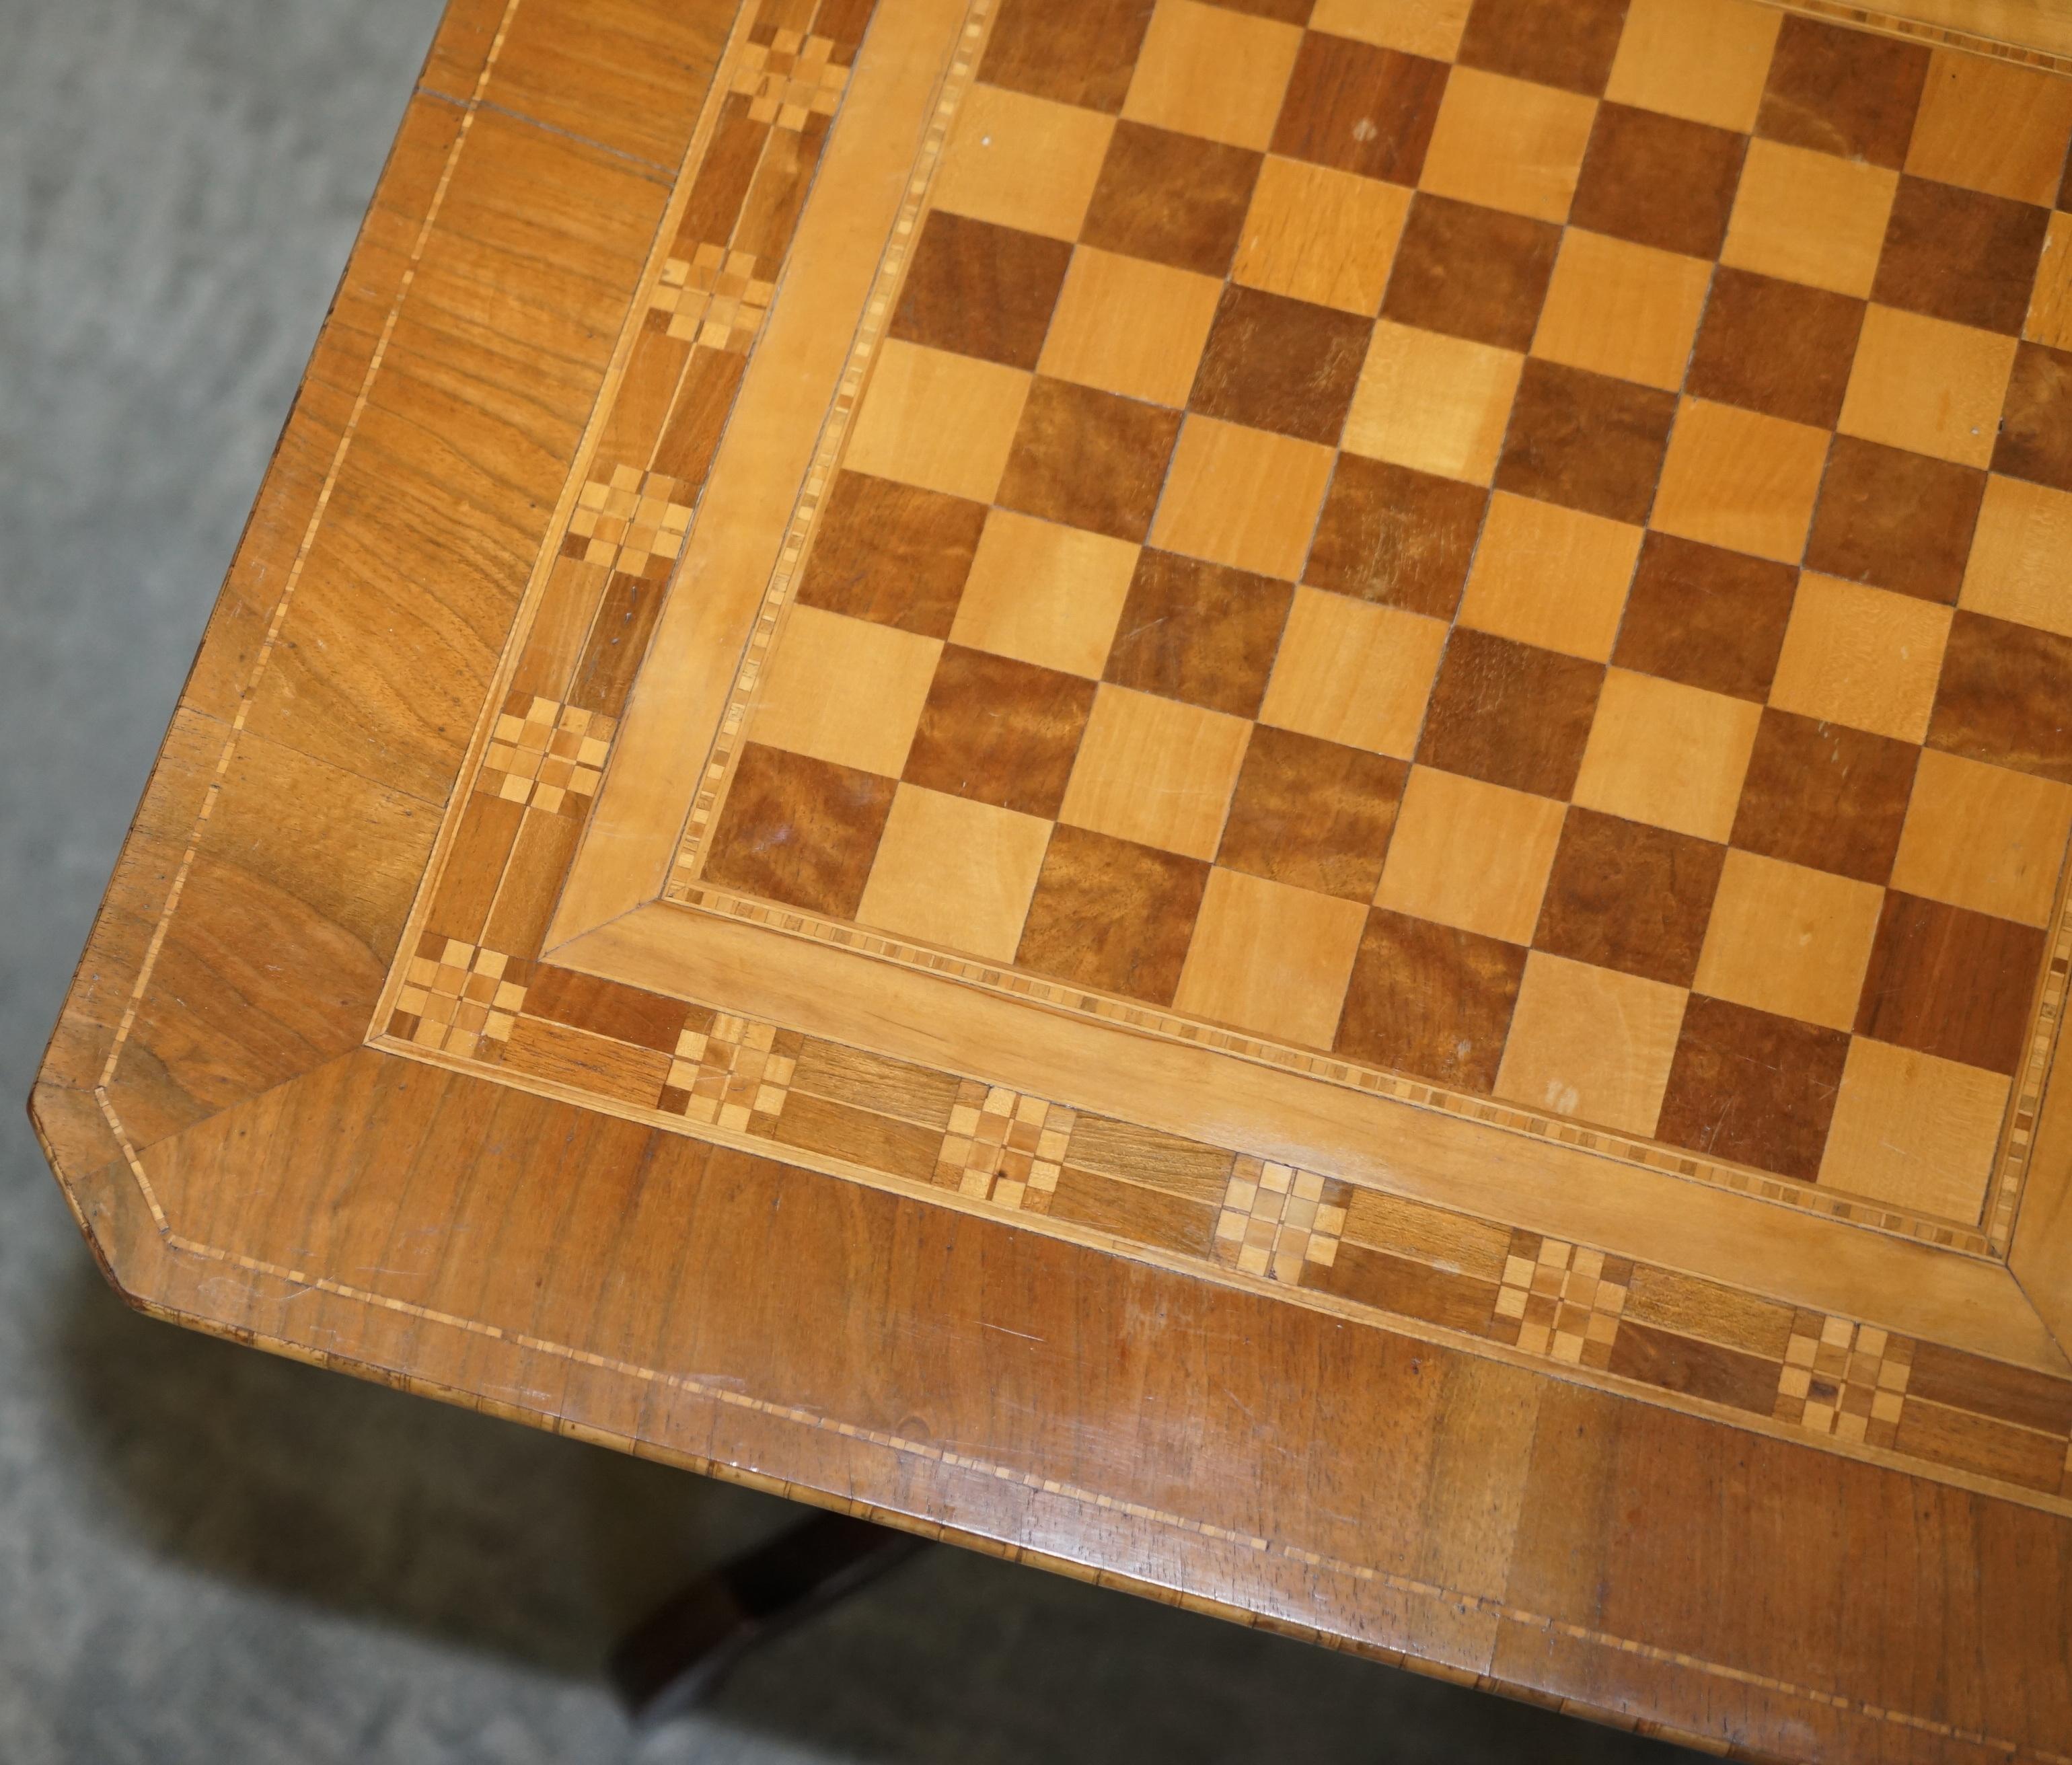 High Victorian Antique circa 1880 Fruitwood, Satinwood & Walnut Chess Board Tripod Table